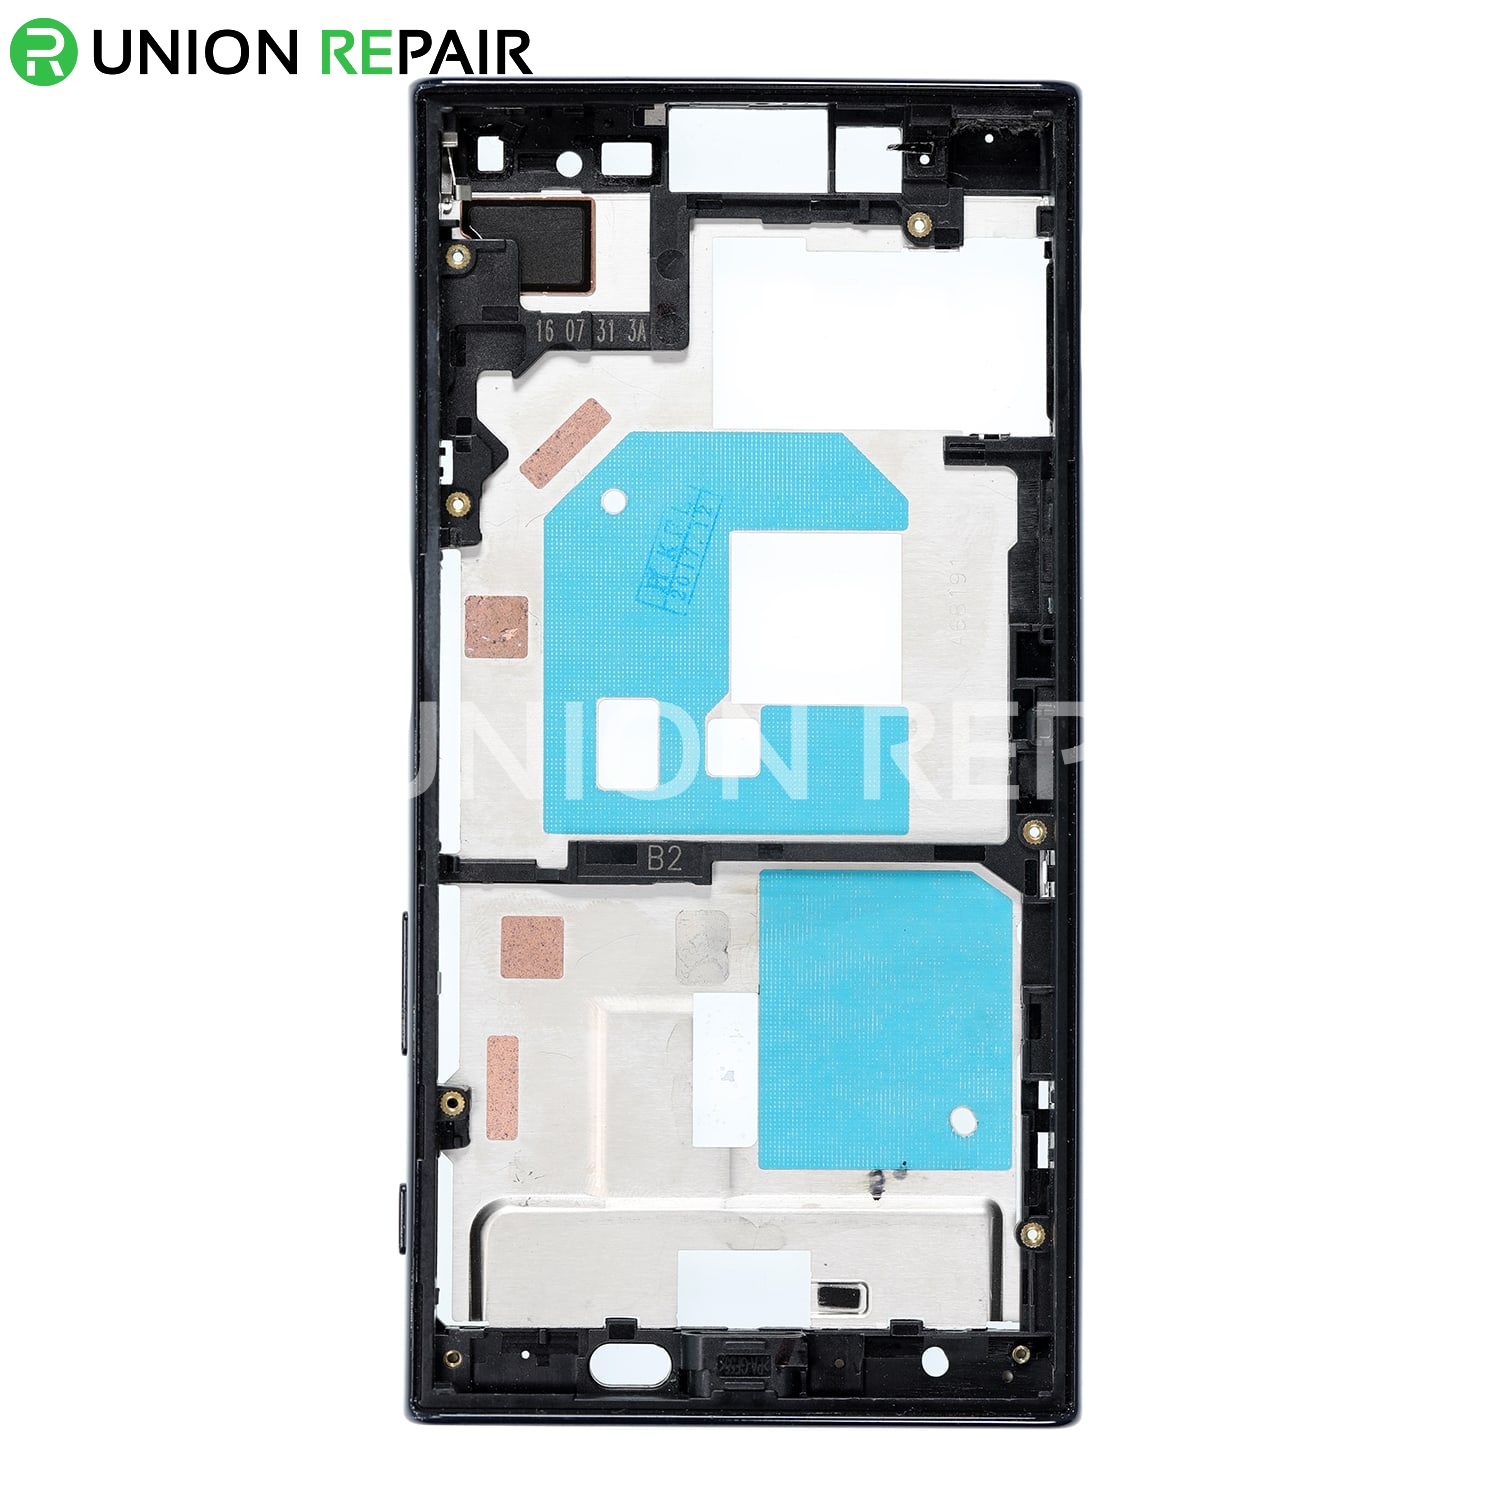 Replacement for Sony Xperia X Compact/Mini Middle Frame Front Housing - Black